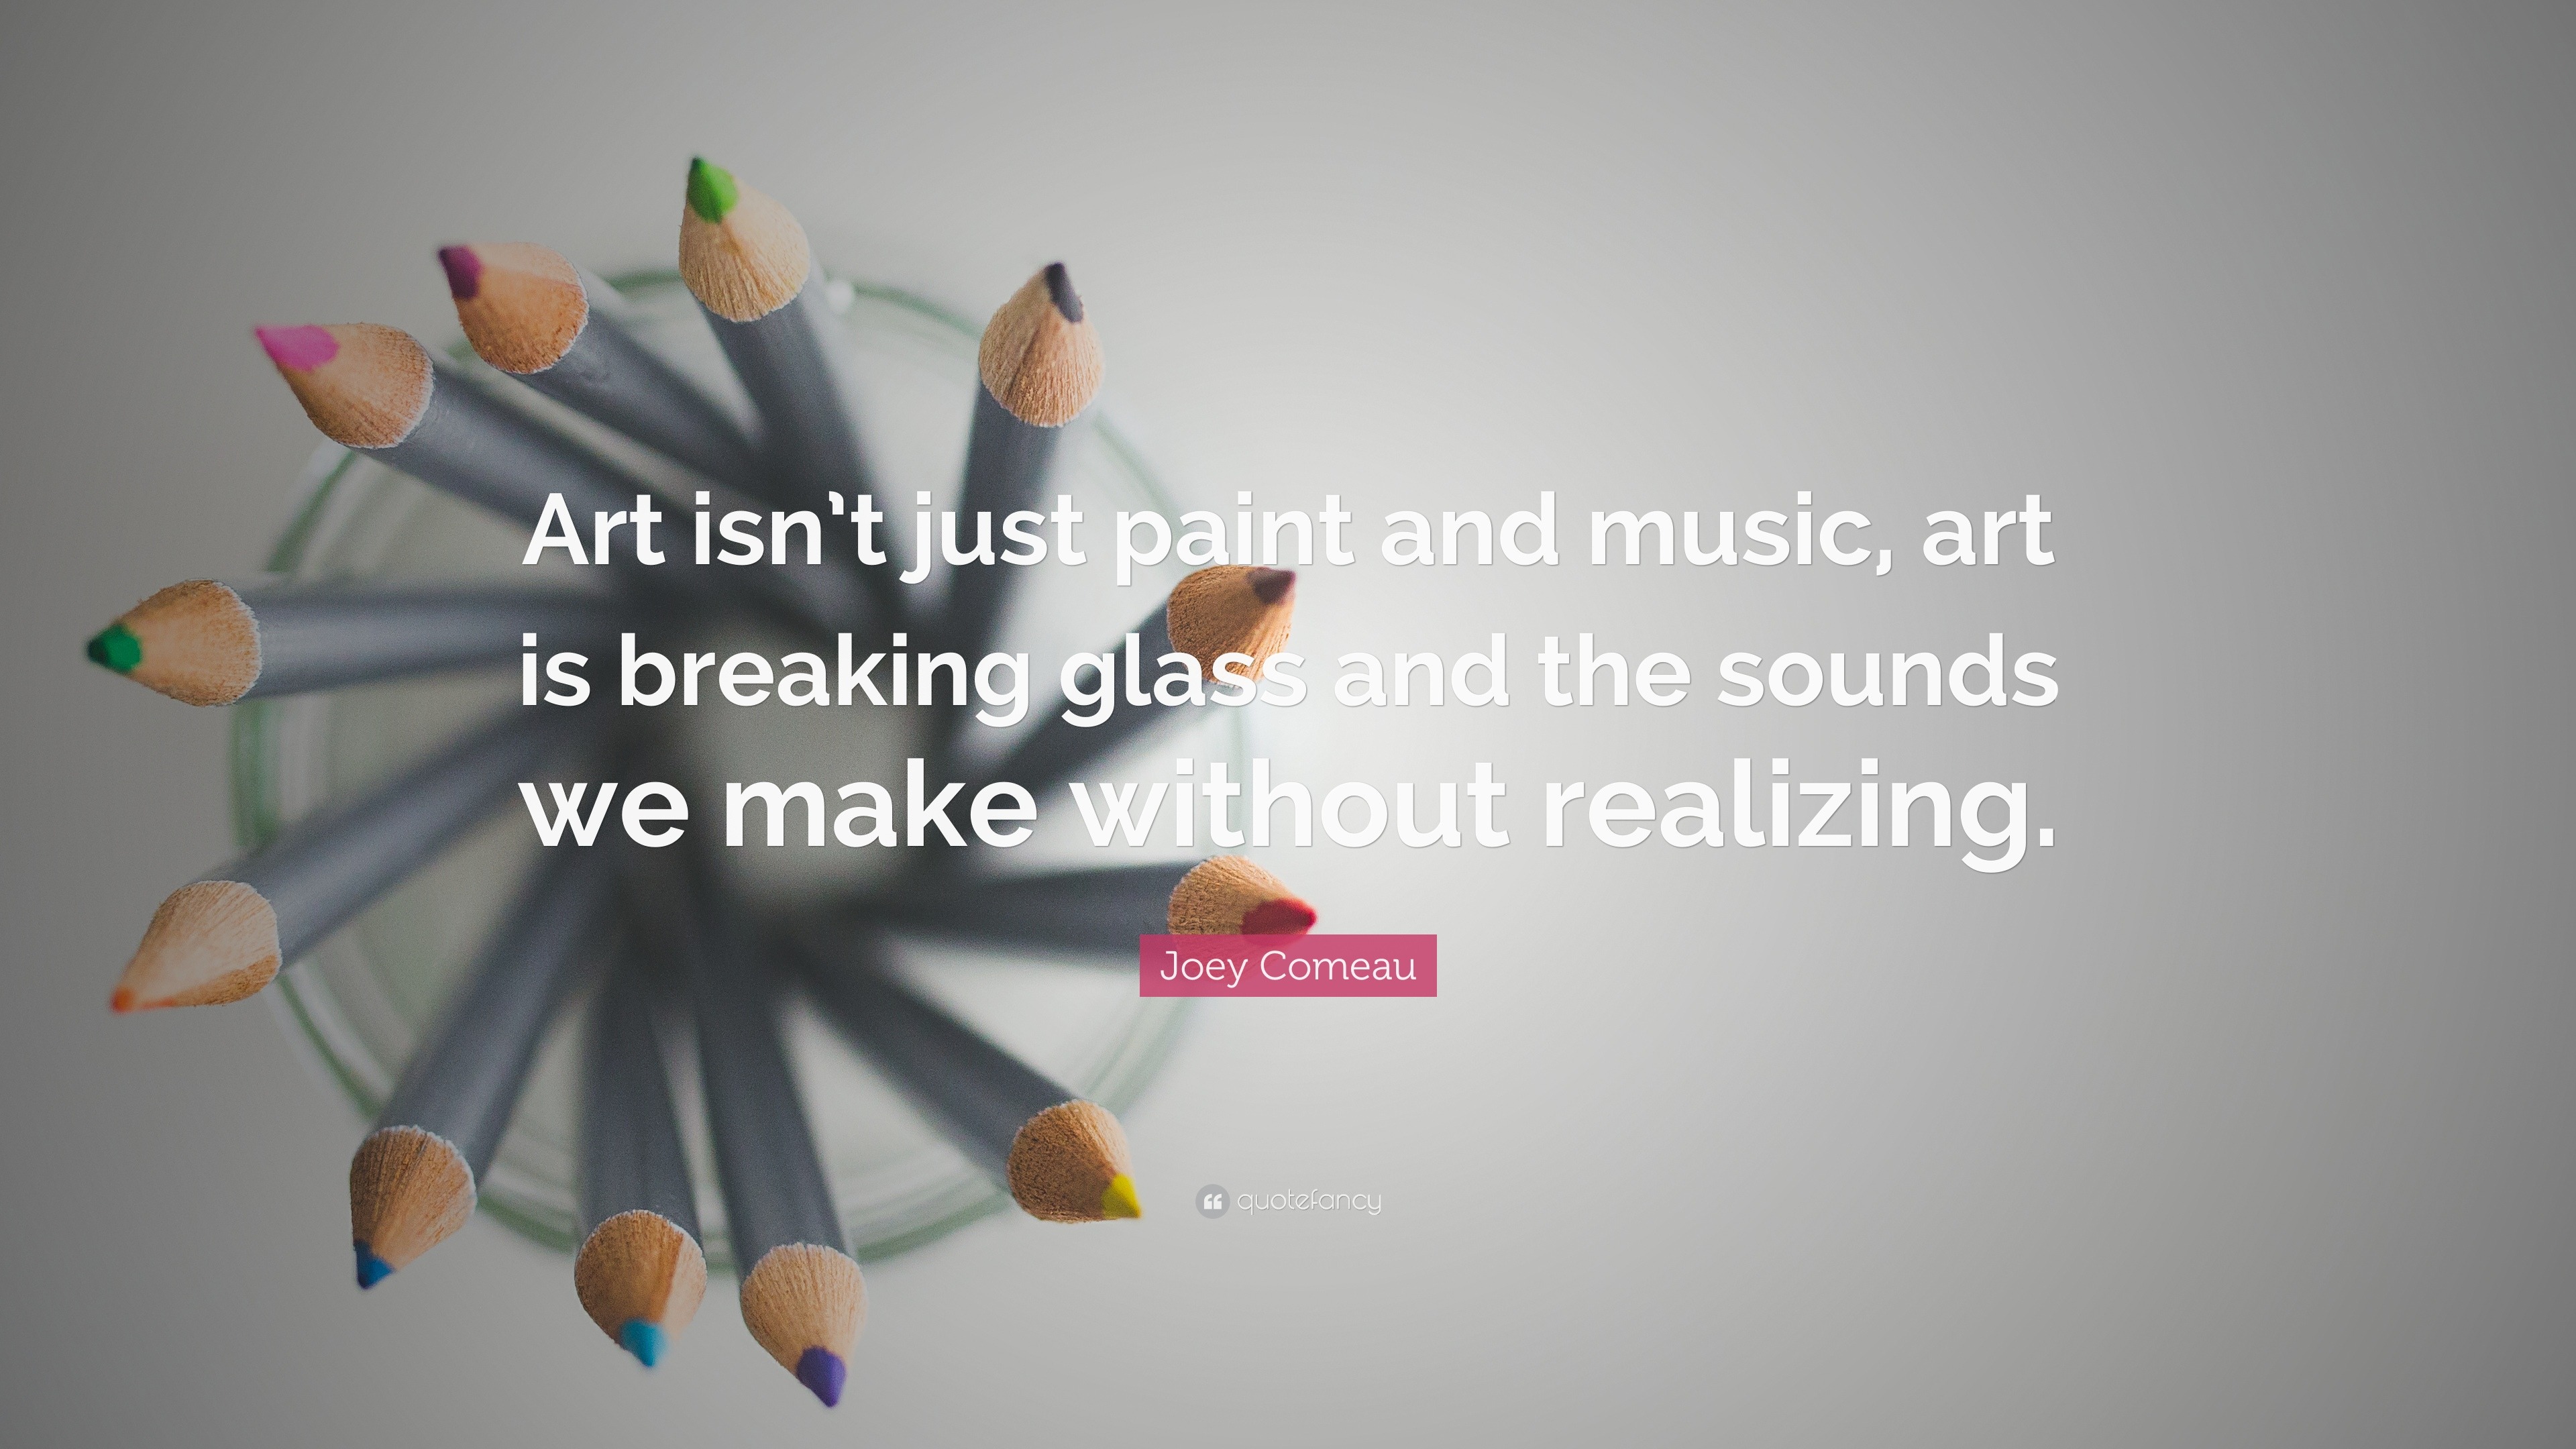 https://quotefancy.com/media/wallpaper/3840x2160/1165265-Joey-Comeau-Quote-Art-isn-t-just-paint-and-music-art-is-breaking.jpg